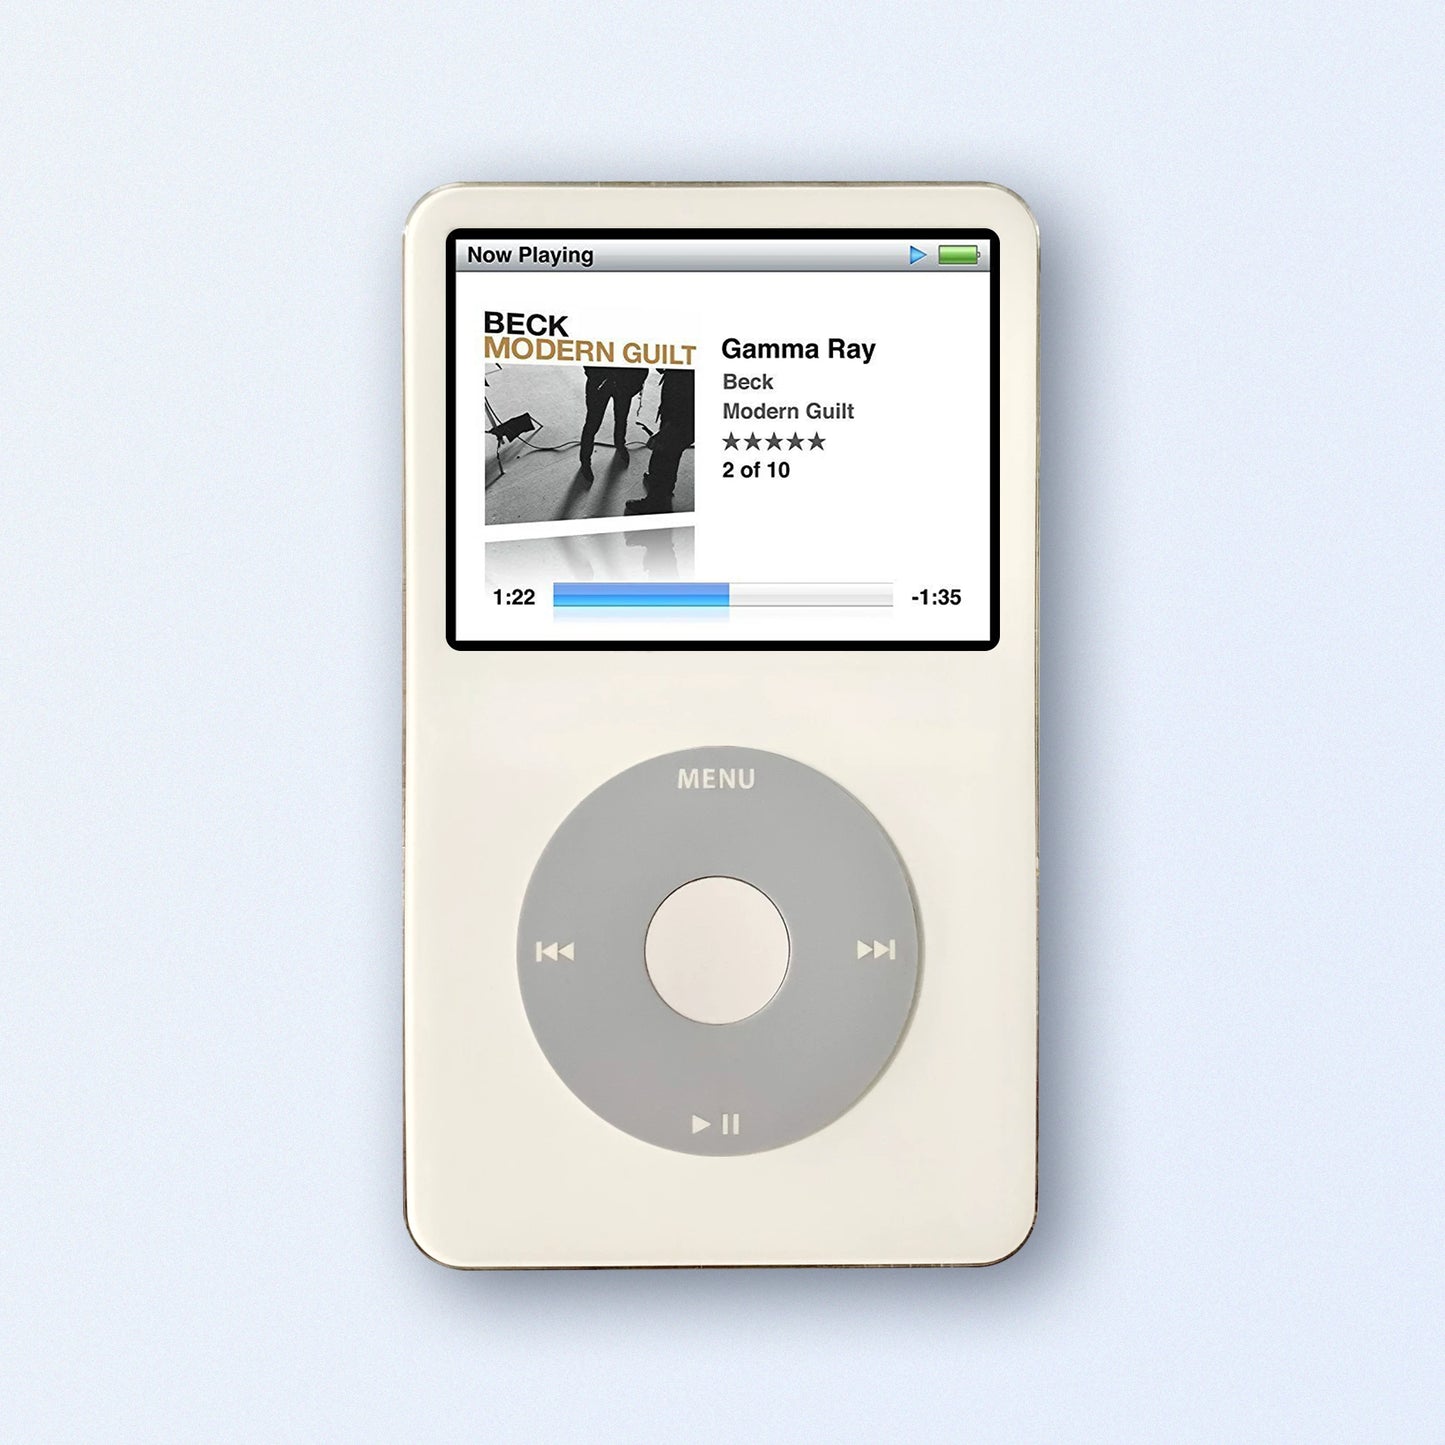 White Apple iPod Classic Black 5th Generation upgraded with SDXC Card